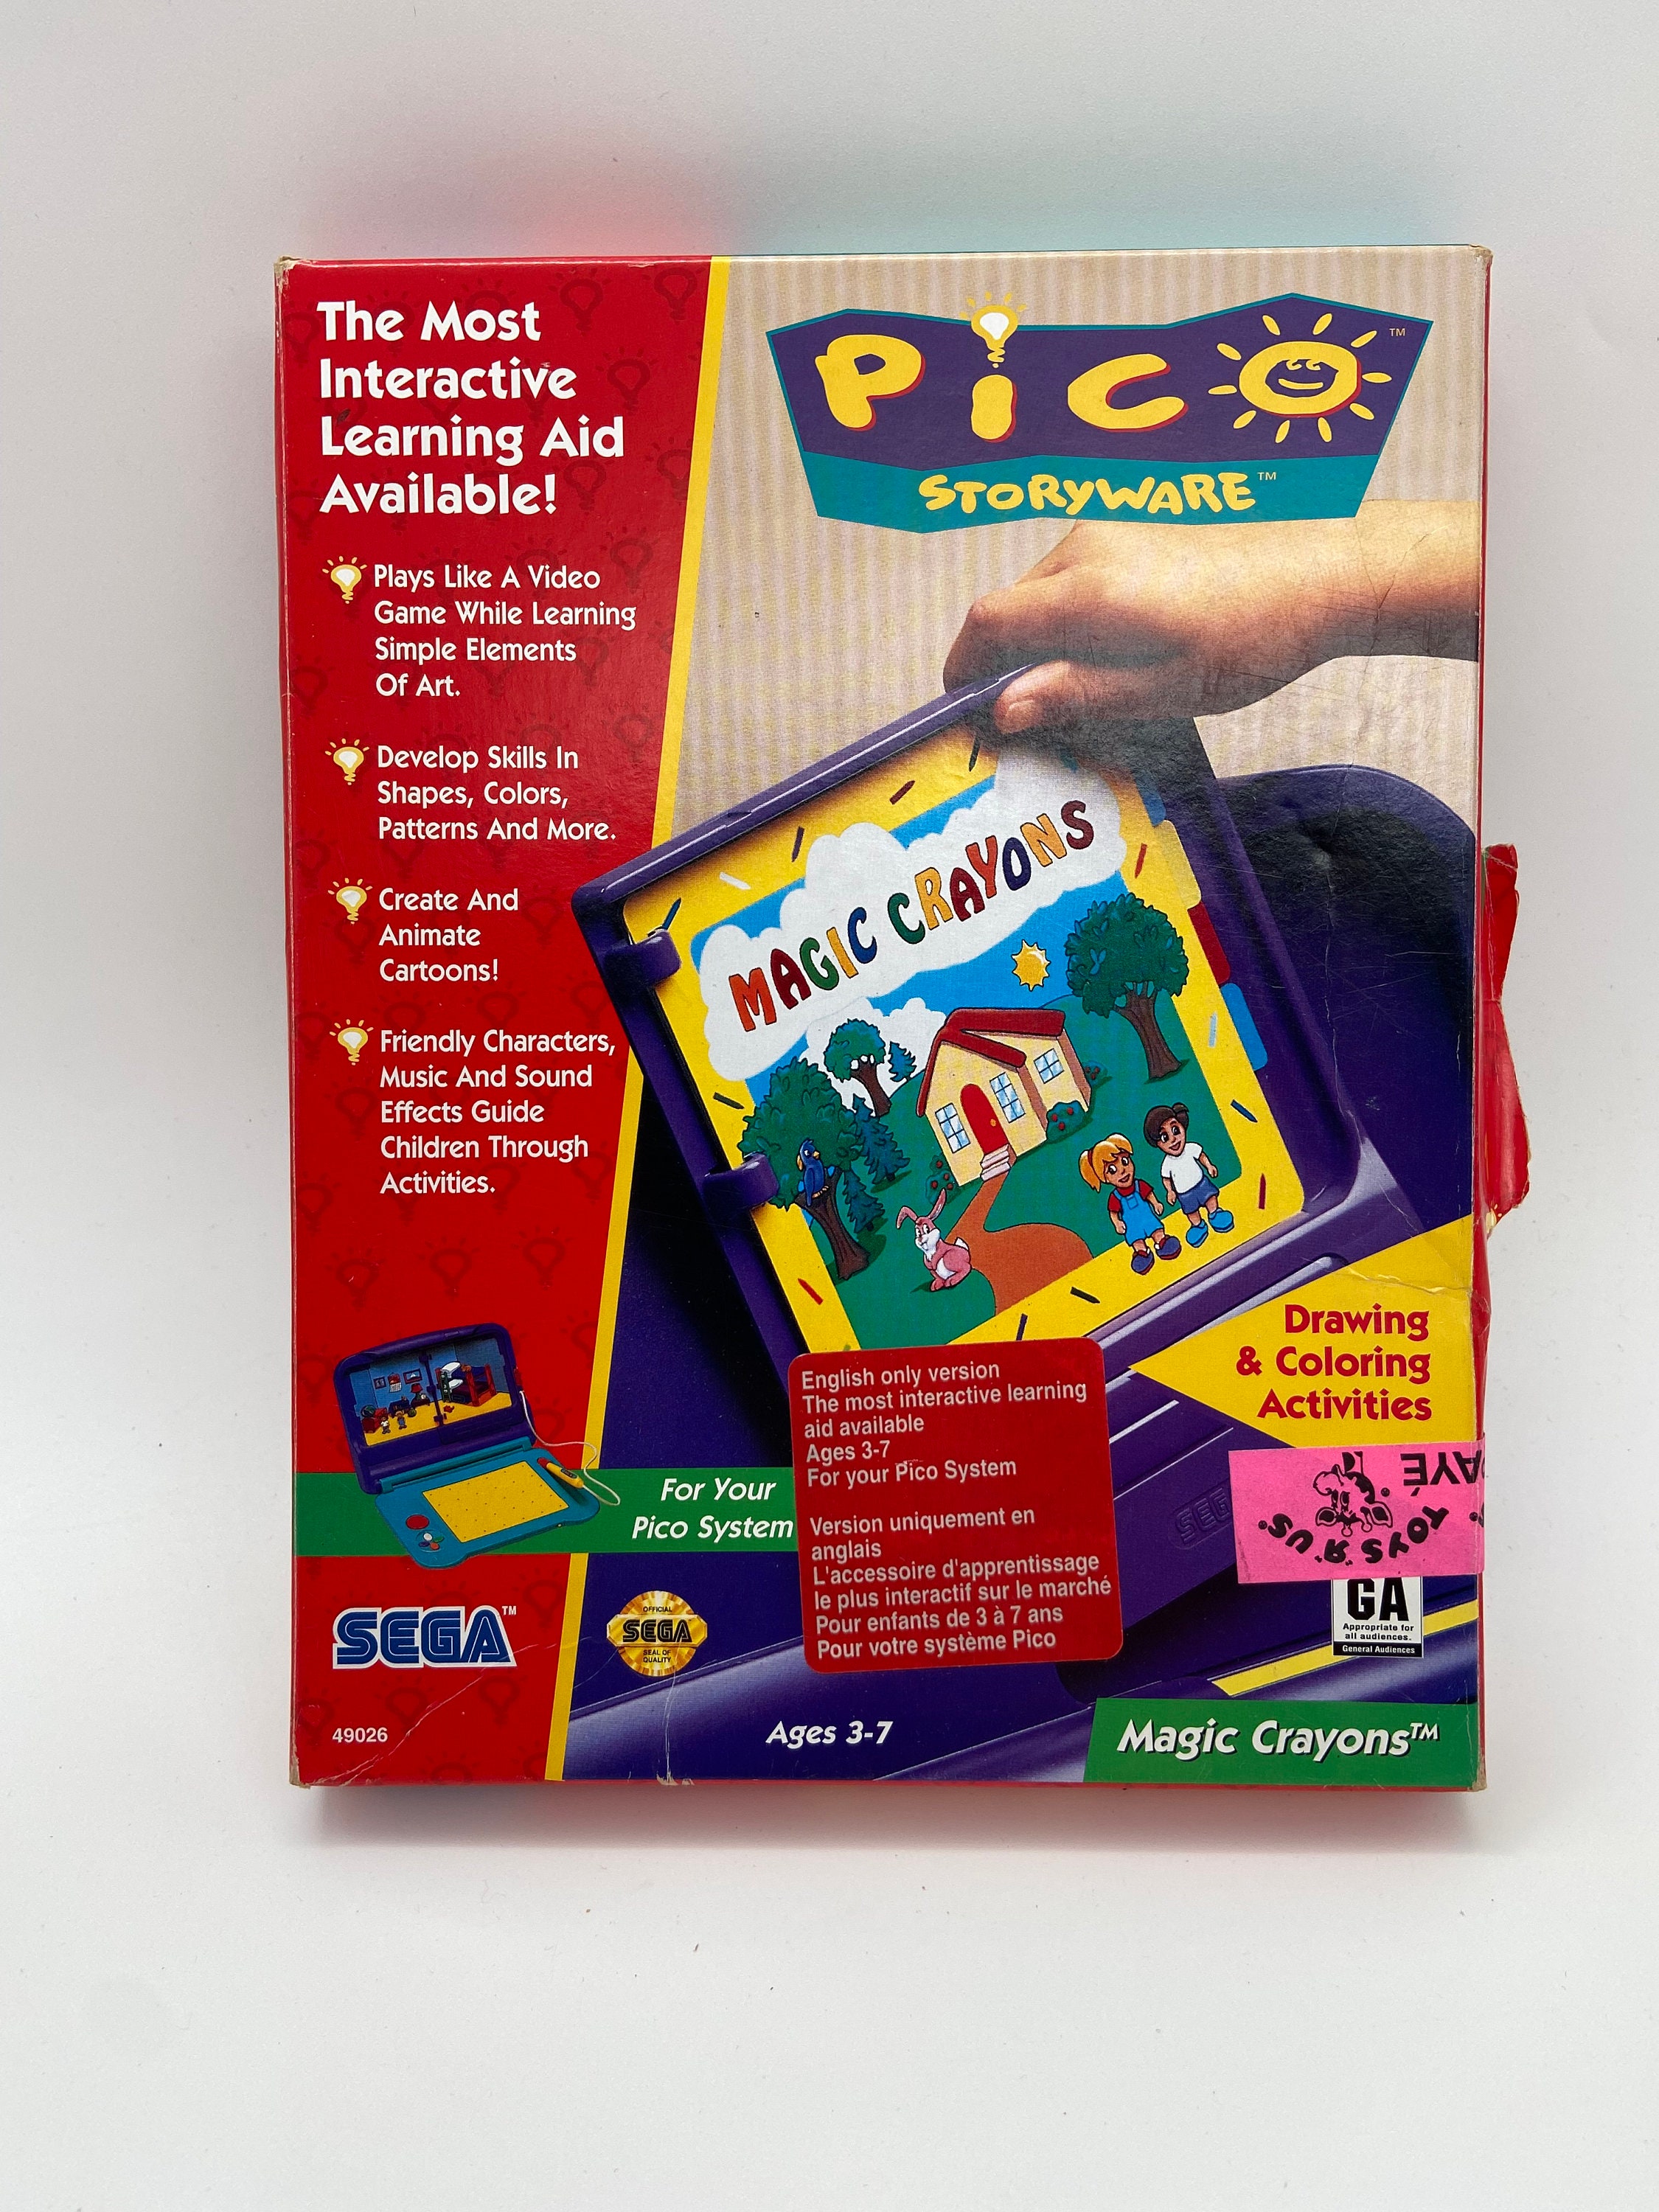 Magic Crayons for the Pico System by Sega 